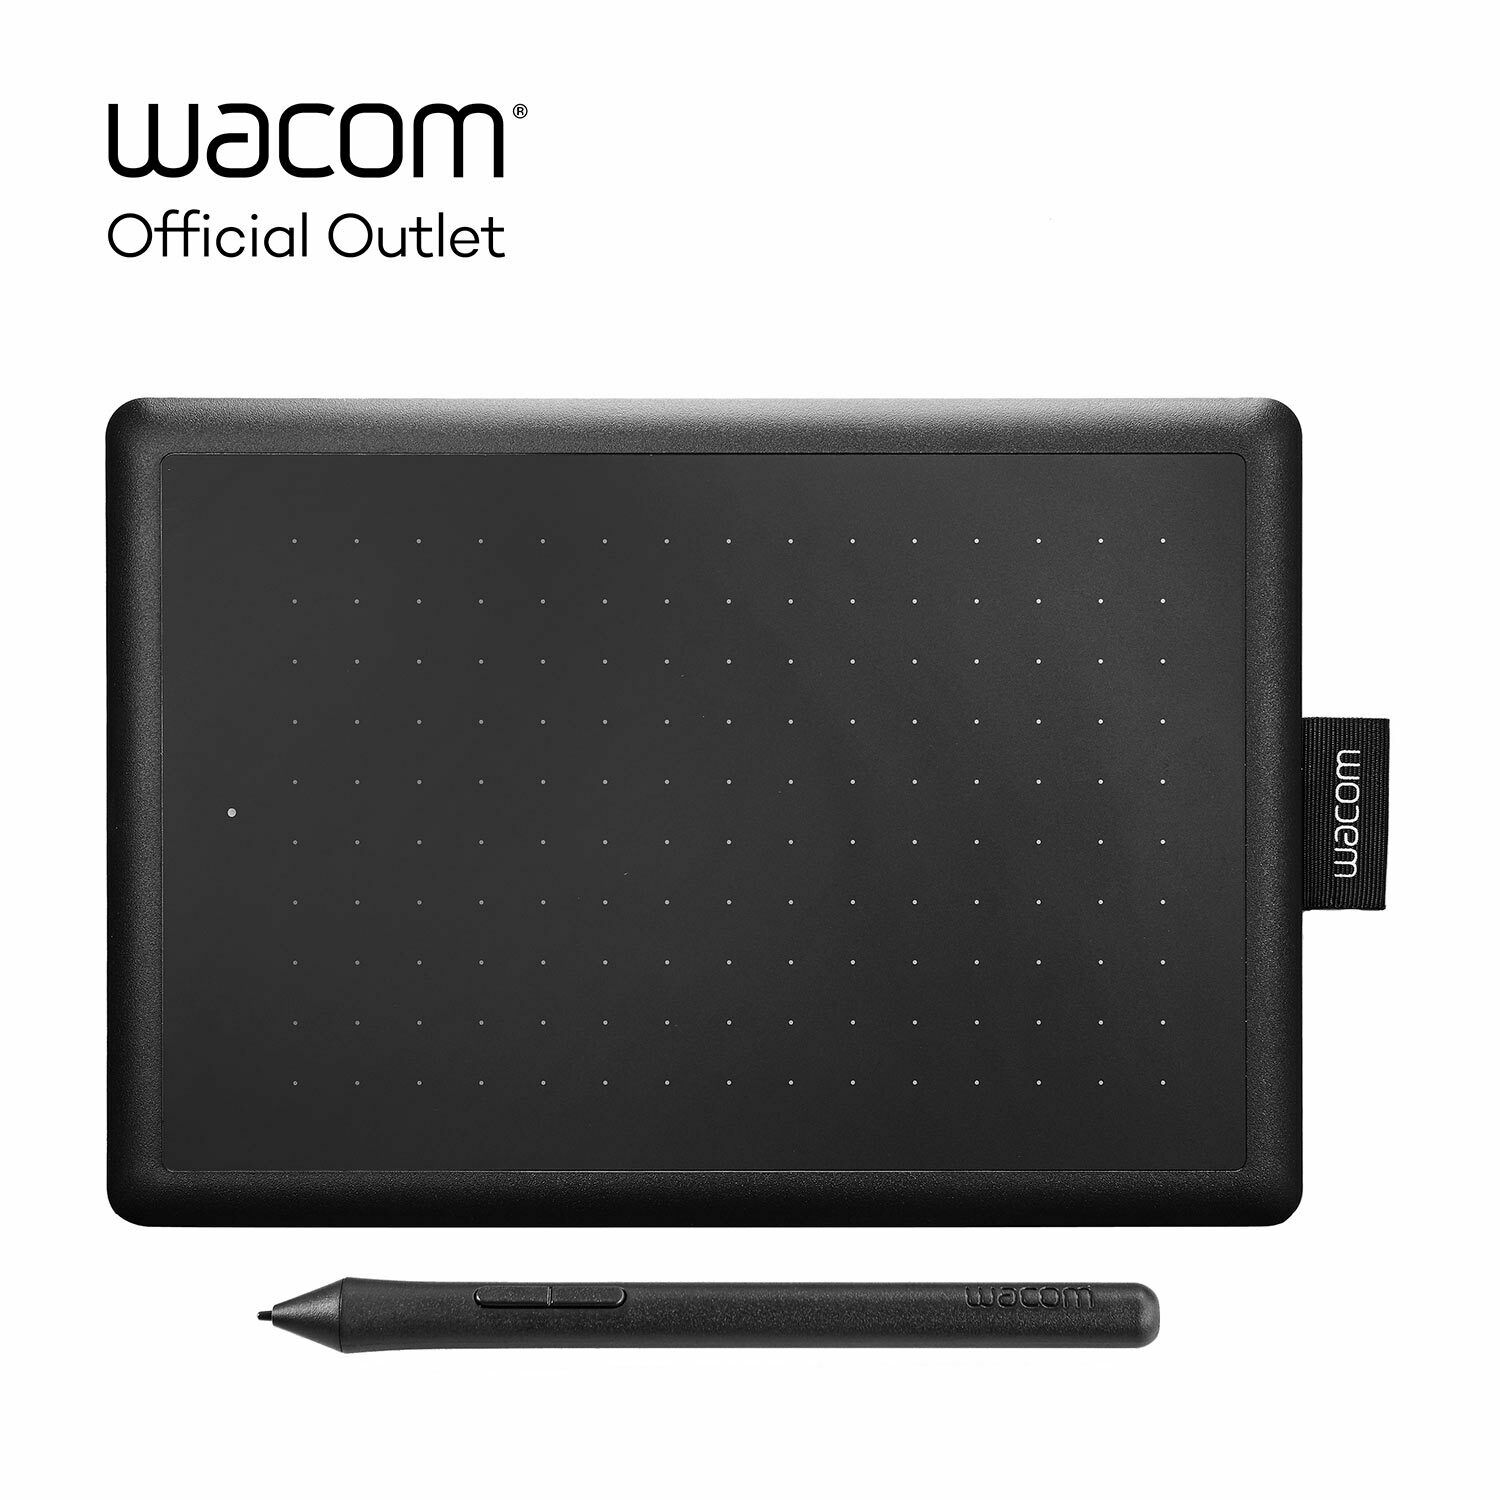 Certified Refurbished One by Wacom Graphic Drawing Art Tablet for Beginners